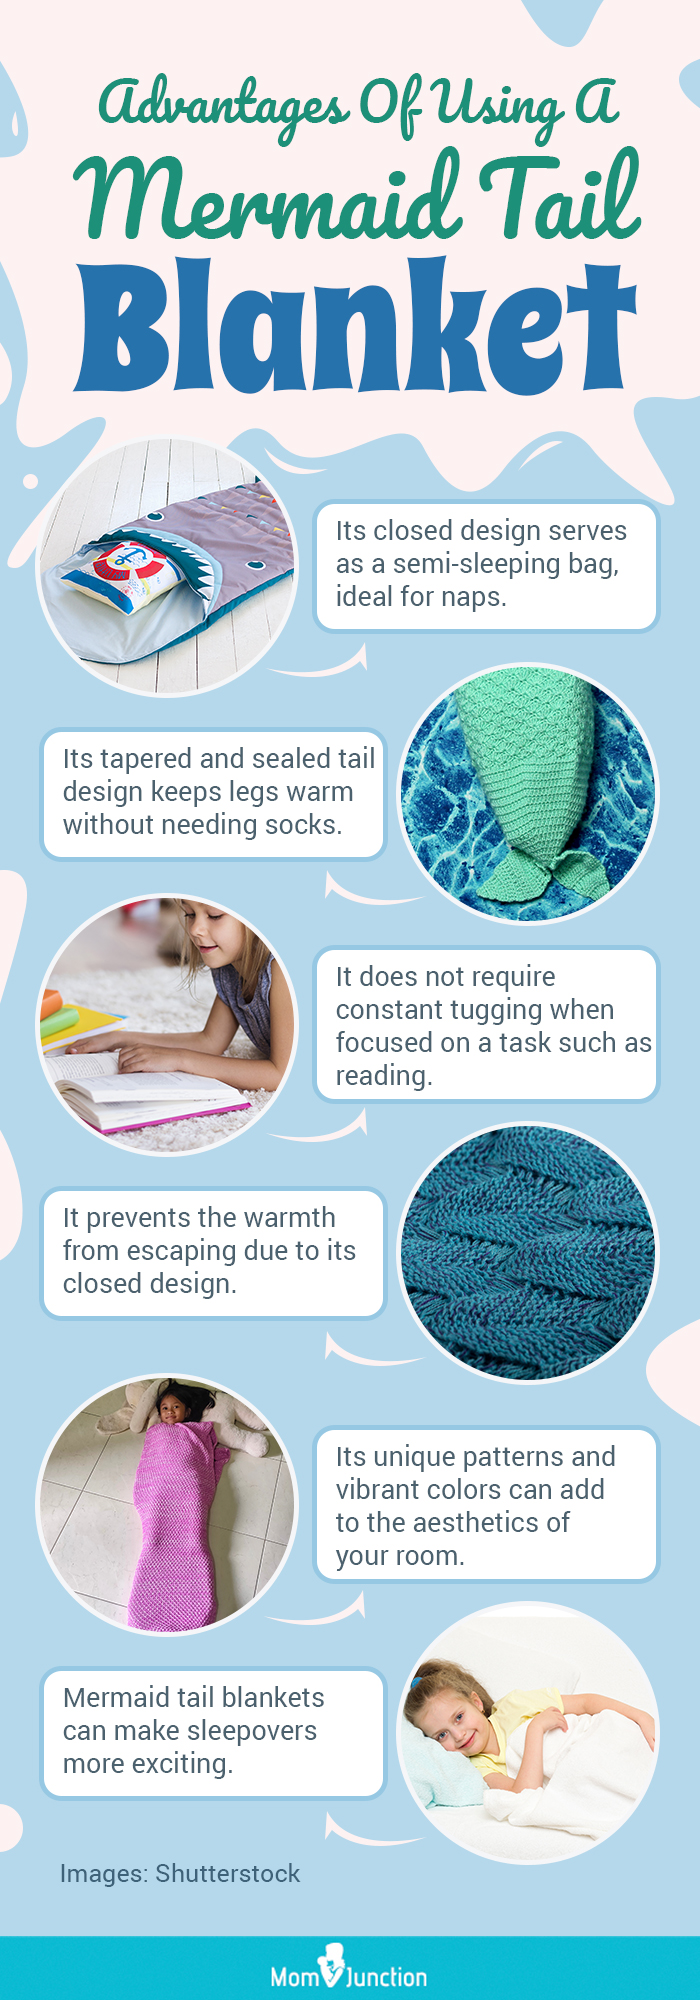 Advantages Of Using A Mermaid Tail Blanket (infographic)